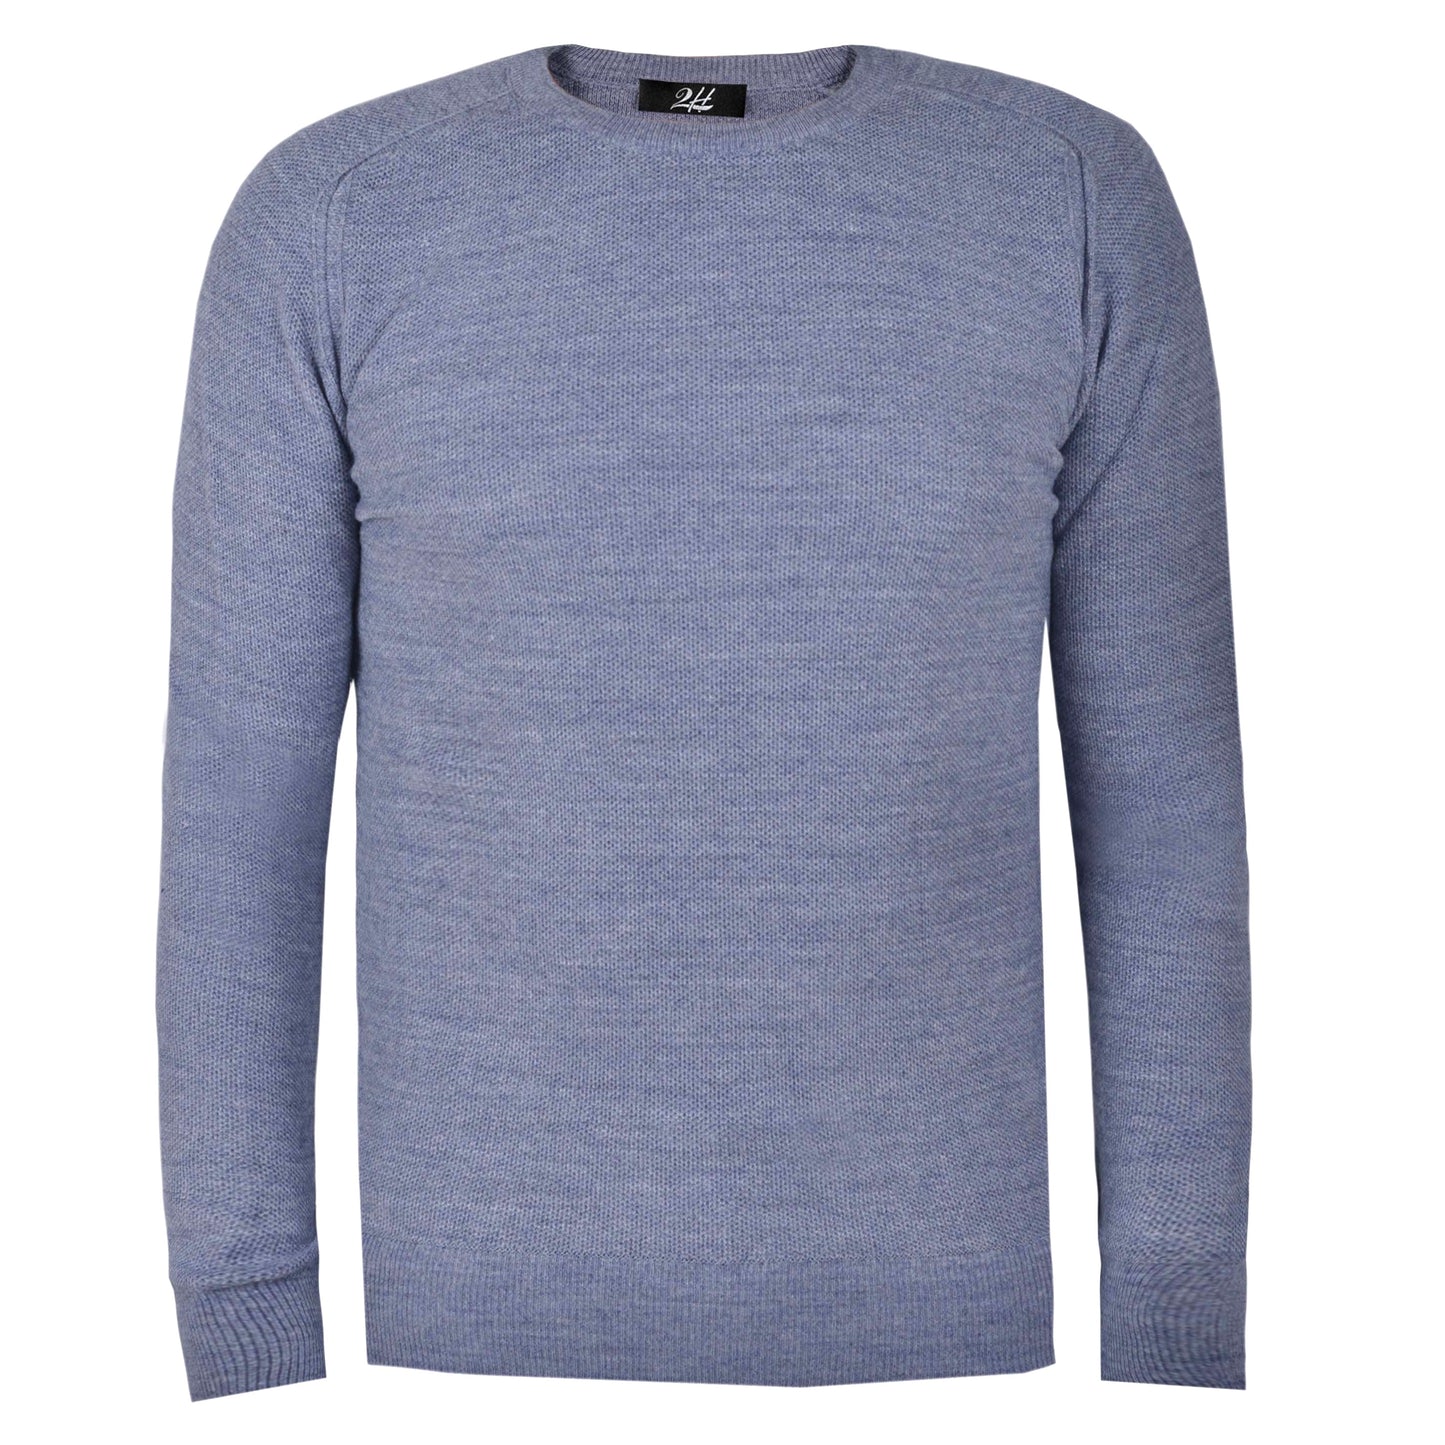 SALE! 2H Blue Knitted Round Neck Sweater